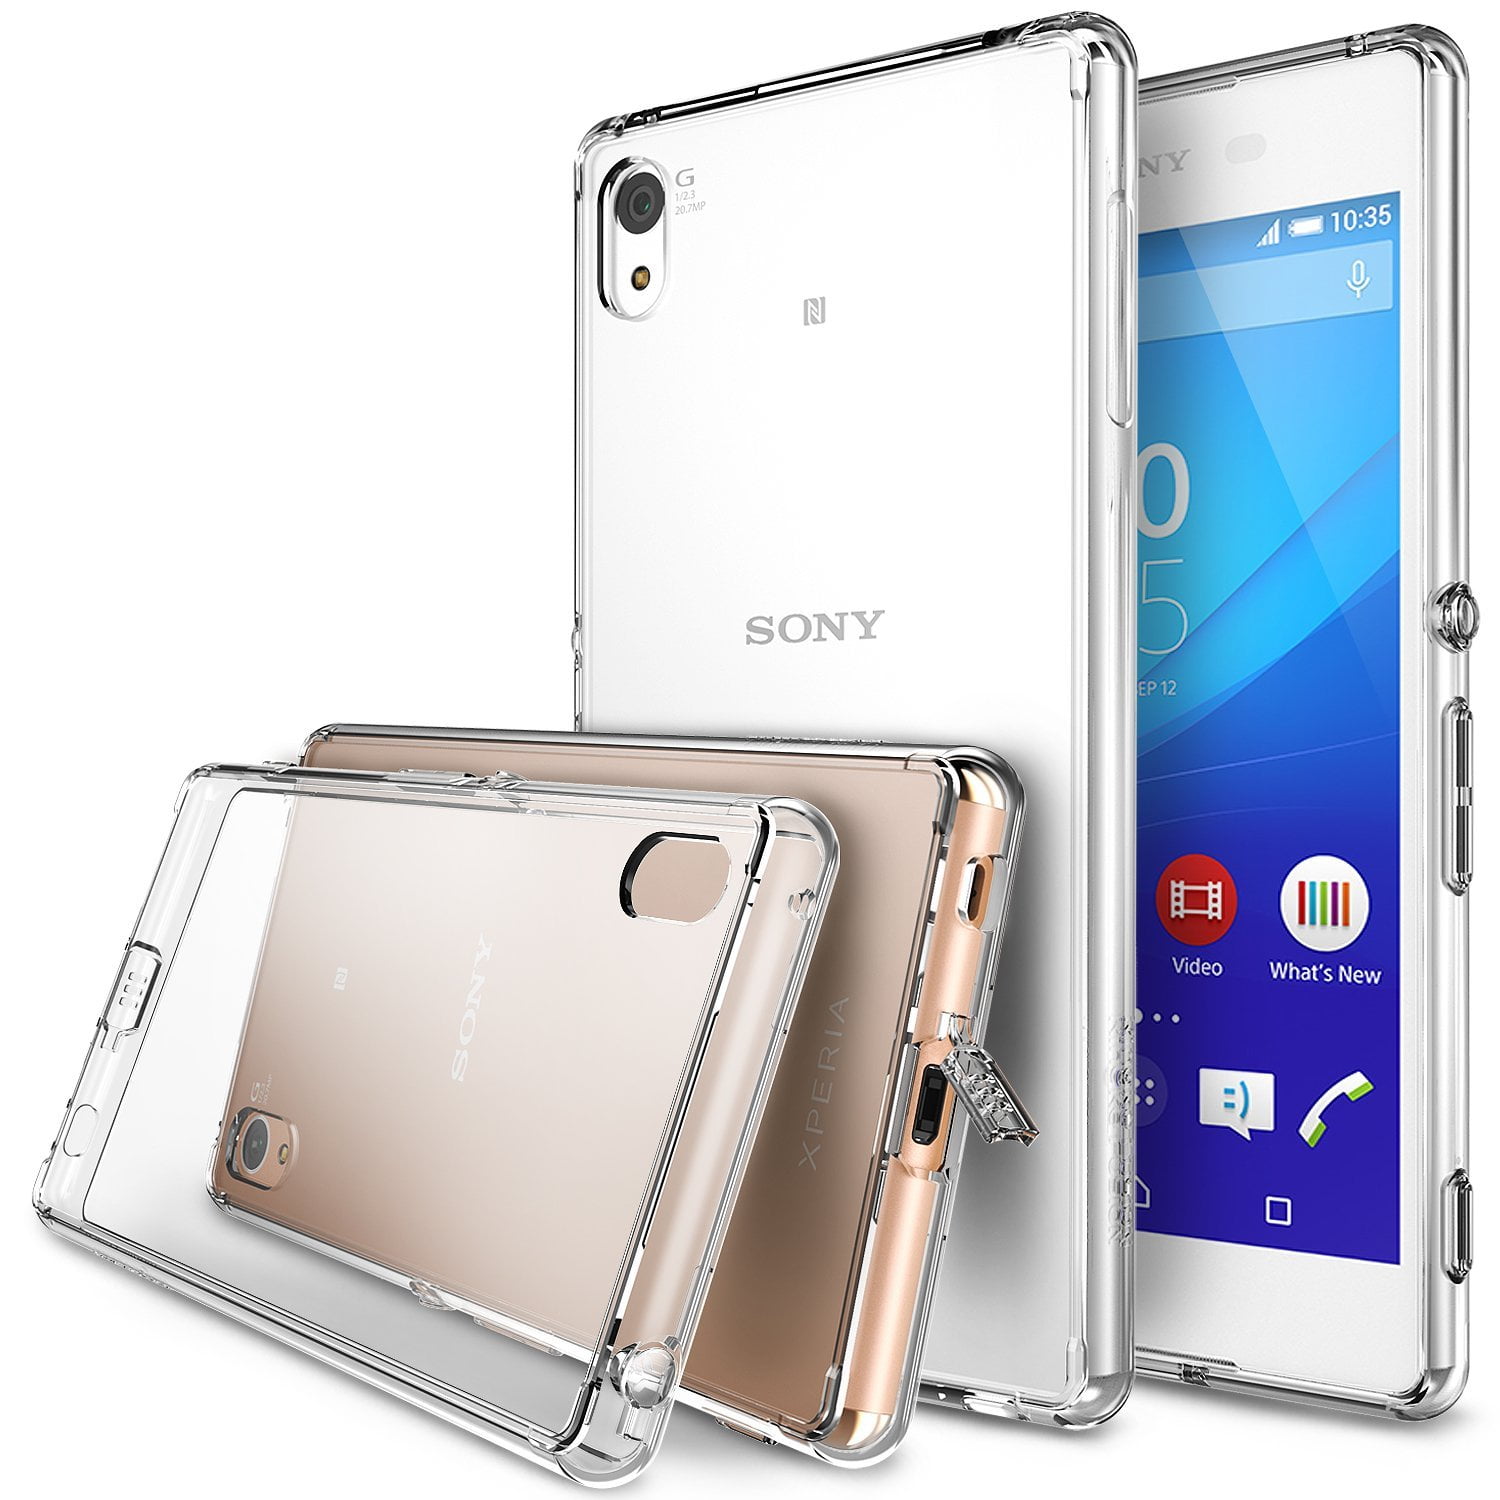 Verval Permanent Verouderd Ringke Fusion Case Compatible with Sony Xperia Z3 Plus, Transparent PC Back  TPU Bumper Drop Protection Phone Cover - Clear - Walmart.com